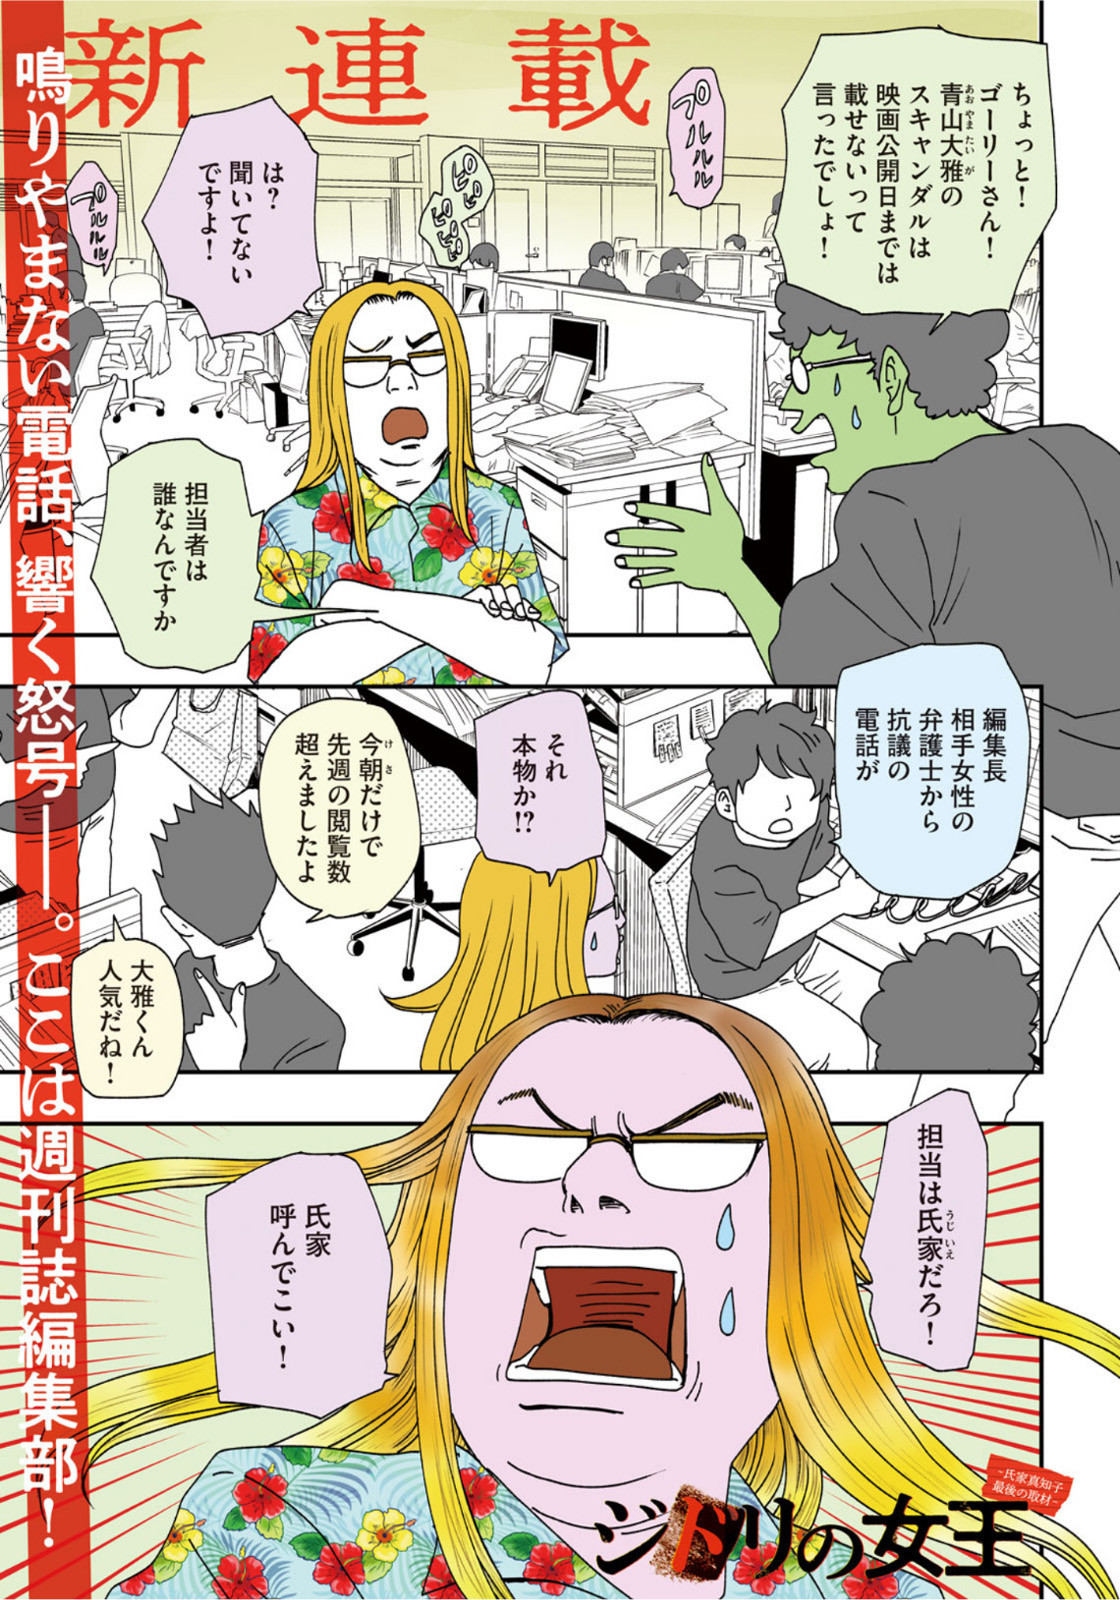 Weekly Morning - 週刊モーニング - Chapter 2022-41 - Page 3